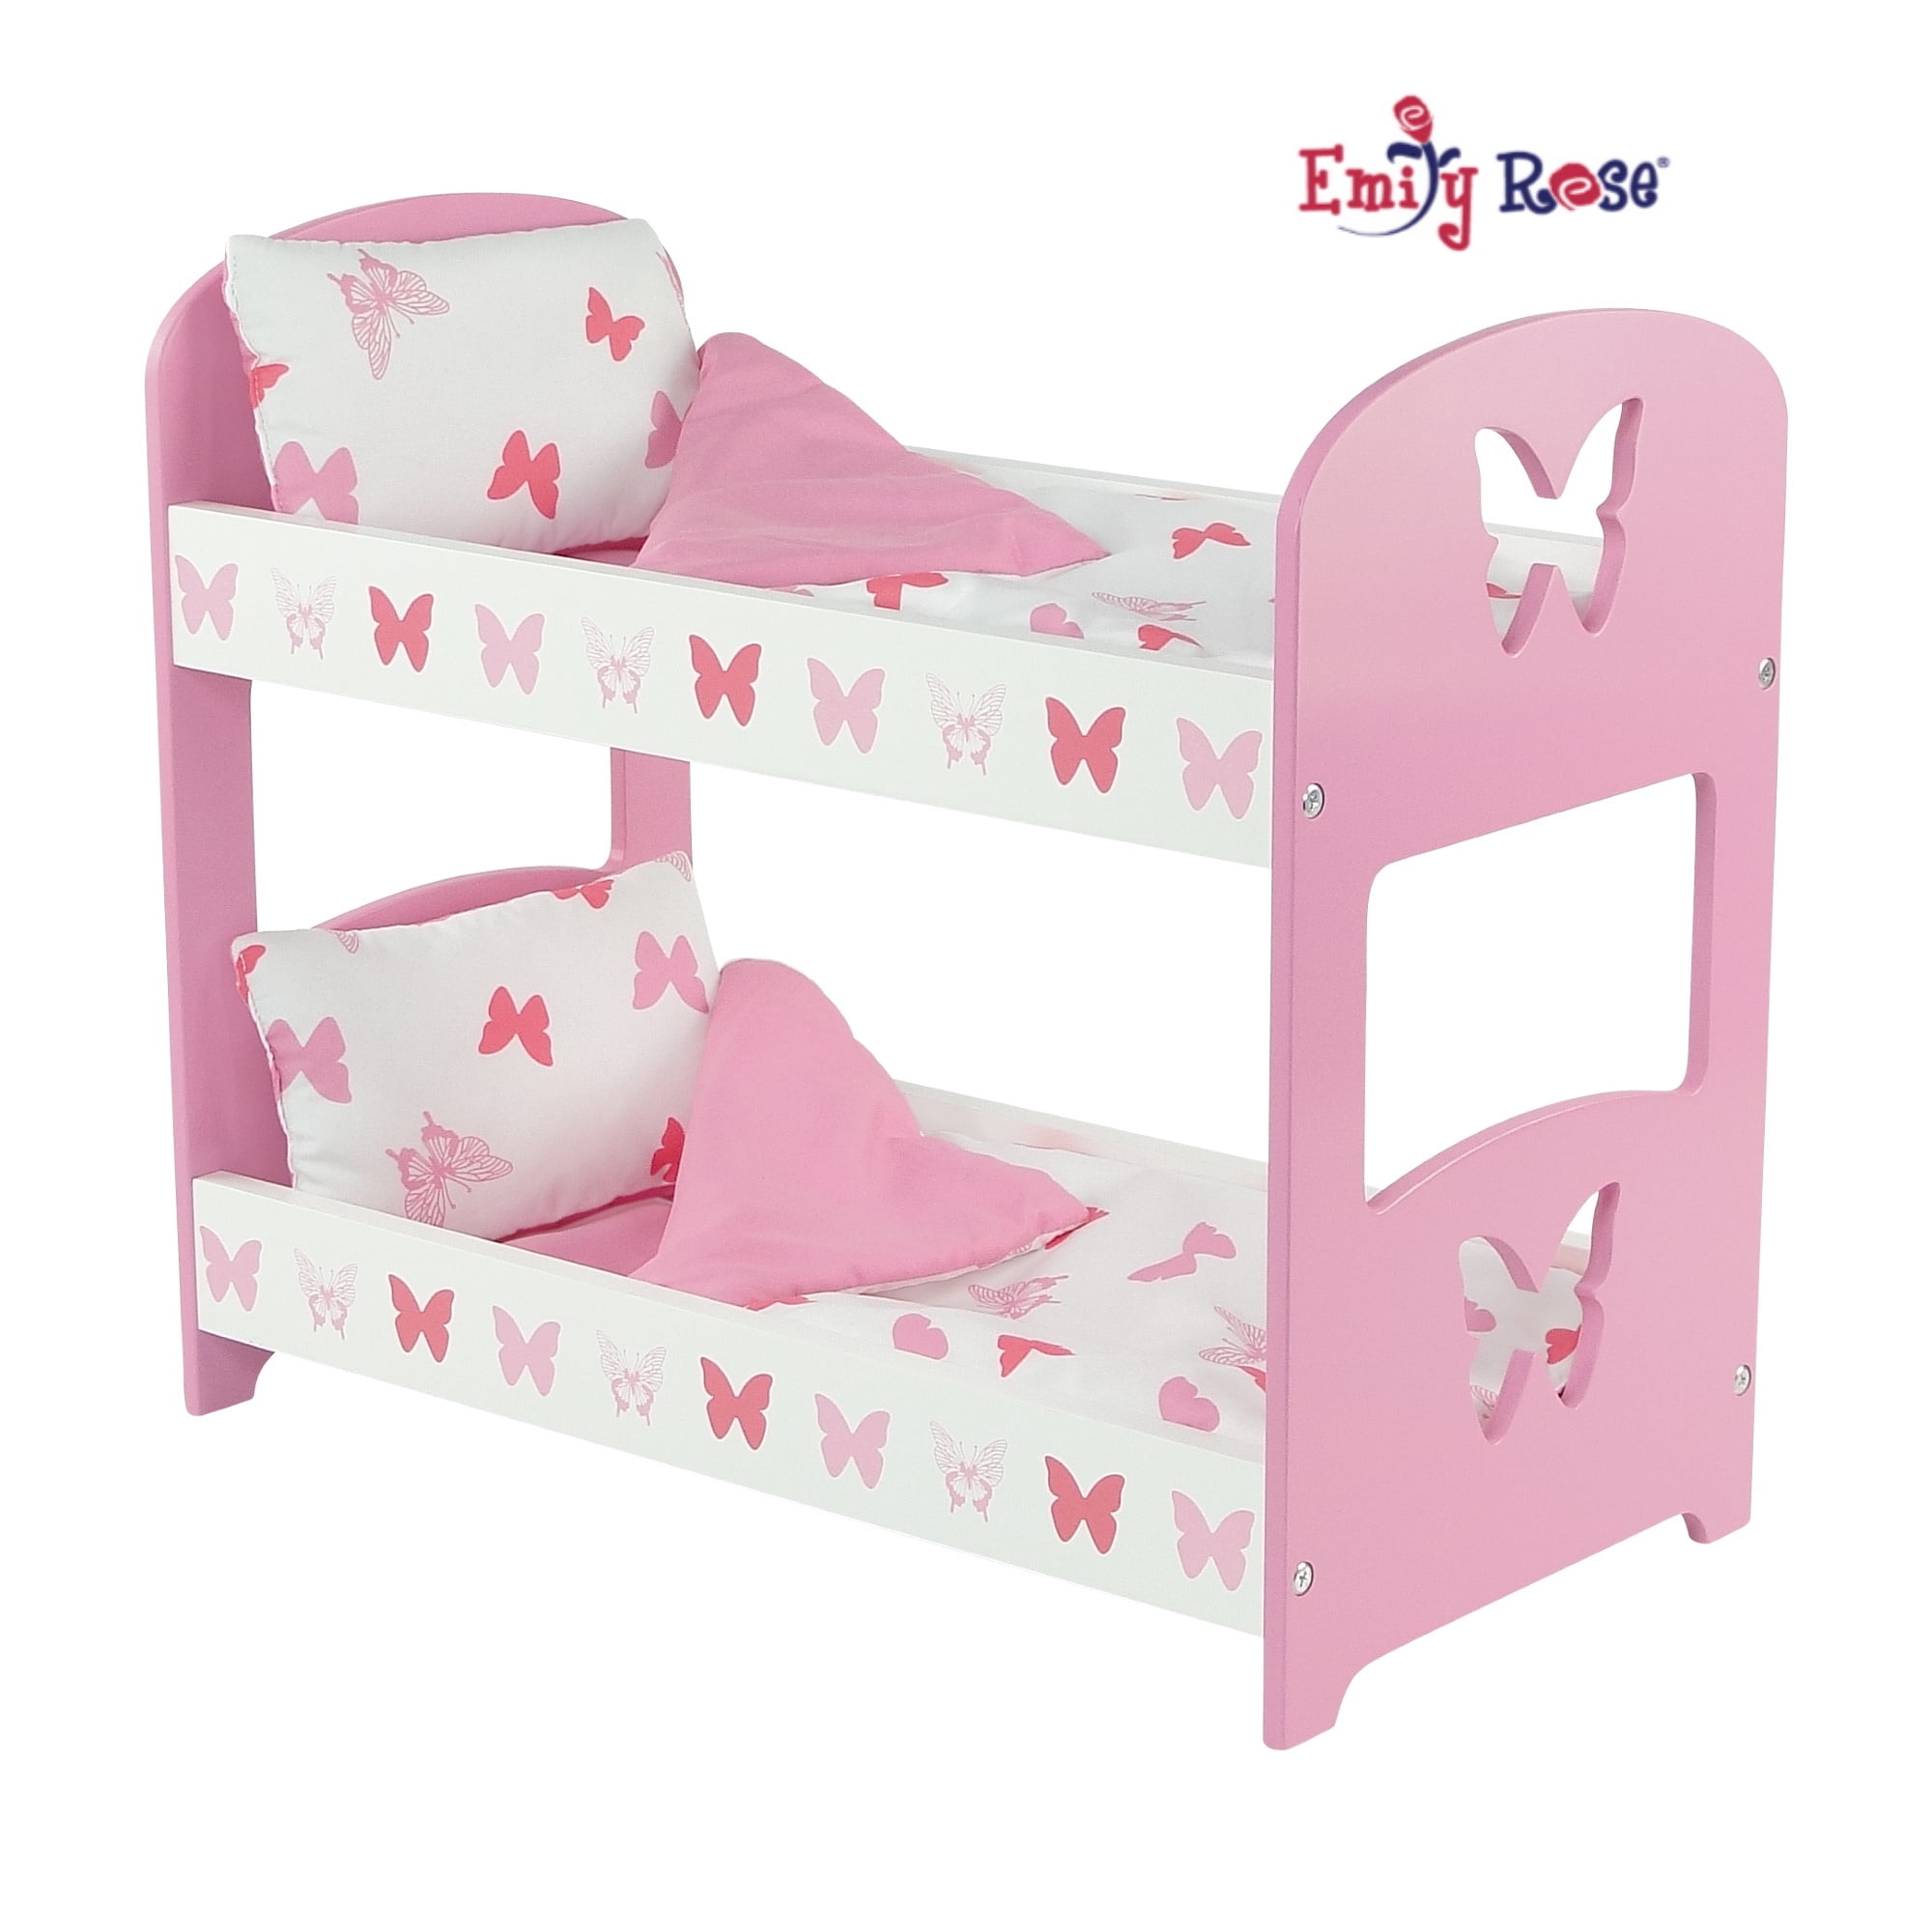 Emily Rose 18 Inch Doll Bed Com, American Girl Doll Bunk Bed